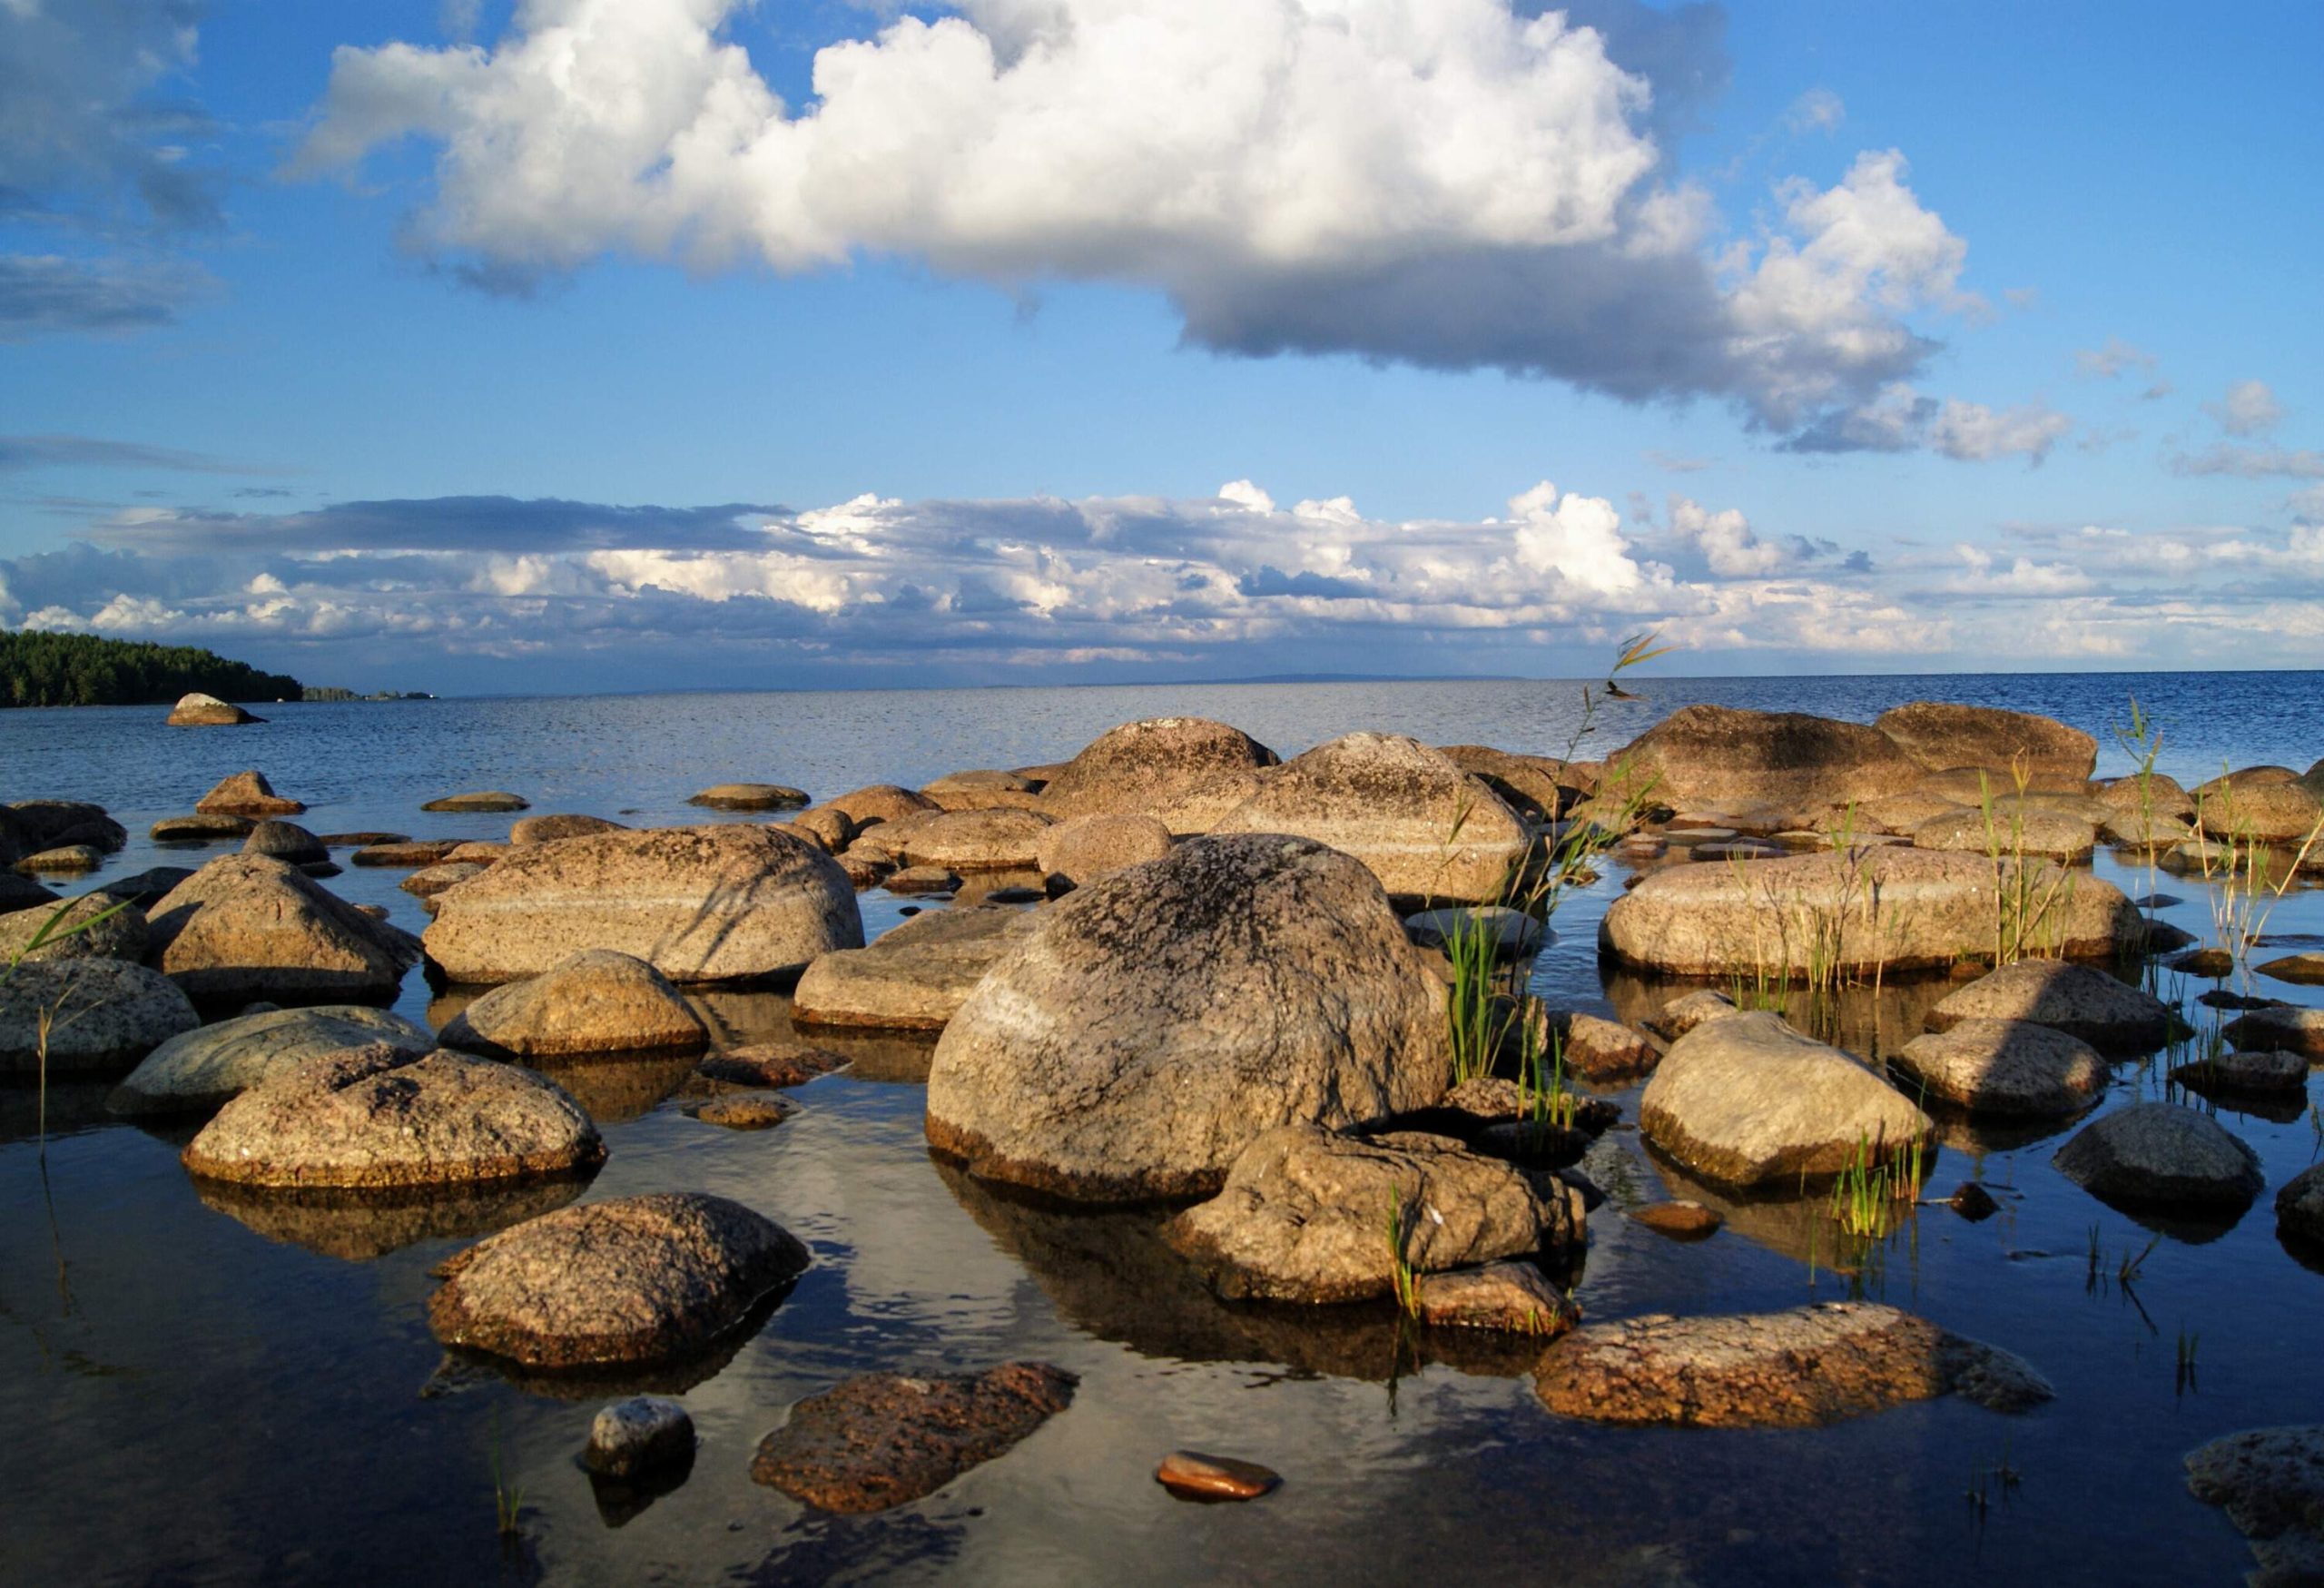 Large boulders on the shore of a beach under the cloudy blue sky.